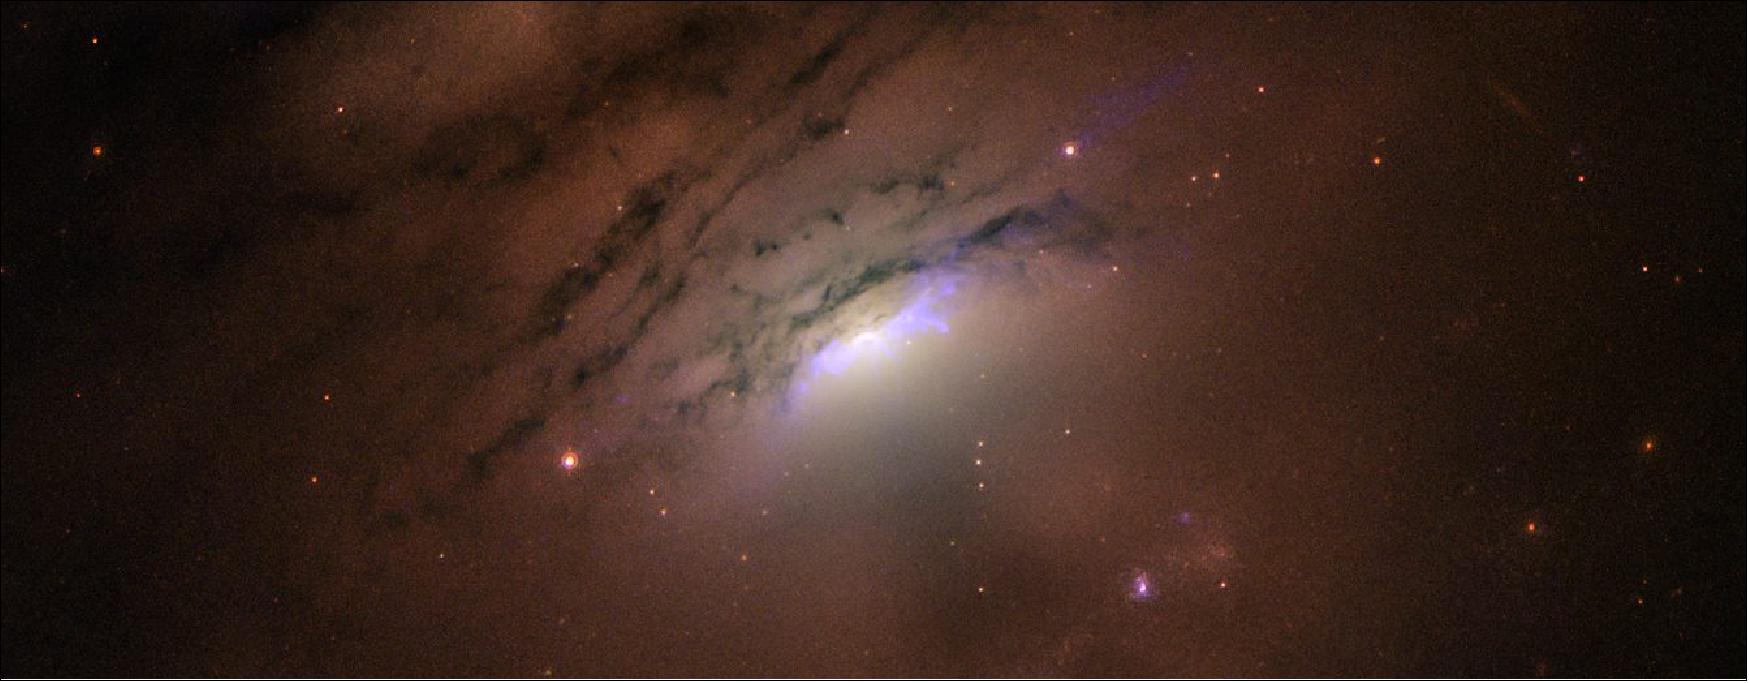 Figure 12: This Hubble Space Telescope image of the heart of nearby active galaxy IC 5063 reveals a mixture of bright rays and dark shadows coming from the blazing core, home of a supermassive black hole. Astronomers suggest that a ring of dusty material surrounding the black hole may be casting its shadow into space. According to their scenario, this interplay of light and shadow may occur when light blasted by the monster black hole strikes the dust ring, which is buried deep inside the core. Light streams through gaps in the ring, creating the brilliant cone-shaped rays. However, denser patches in the disk block some of the light, casting long, dark shadows through the galaxy. - This phenomenon is similar to sunlight piercing our Earthly clouds at sunset, creating a mixture of bright rays and dark shadows formed by beams of light scattered by the atmosphere. However, the bright rays and dark shadows appearing in IC 5063 are happening on a vastly larger scale, shooting across at least 36,000 light-years. IC 5063 resides 156 million light-years from Earth. The observations were taken on March 7 and Nov. 25, 2019 by Hubble's Wide Field Camera 3 and Advanced Camera for Surveys [image credit: NASA, ESA, STScI and W. P. Maksym (CfA)]